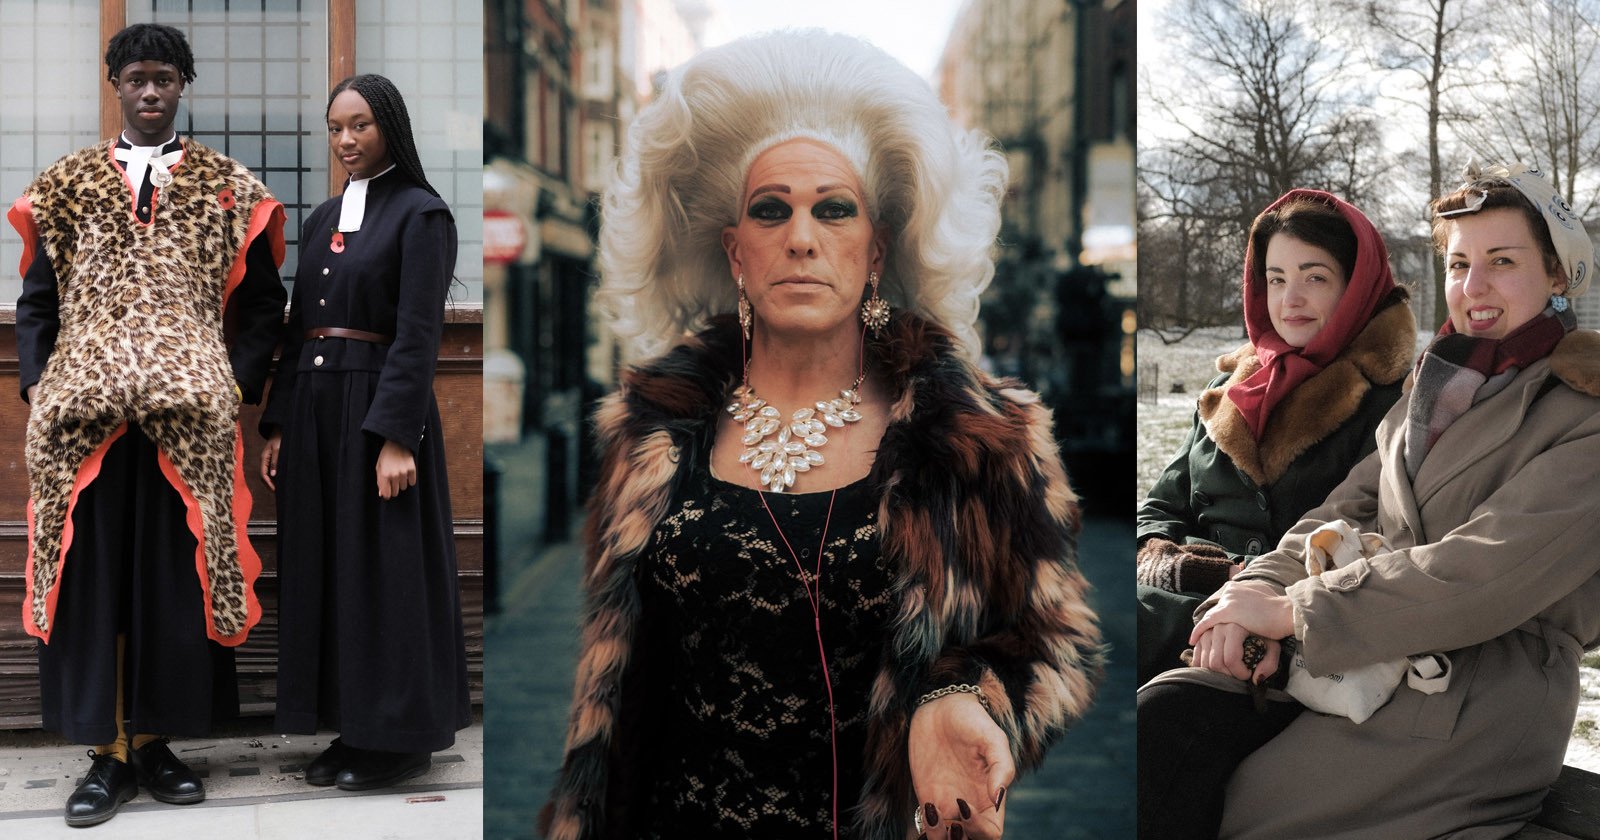 I Photographed a Stranger Every Day for a Year